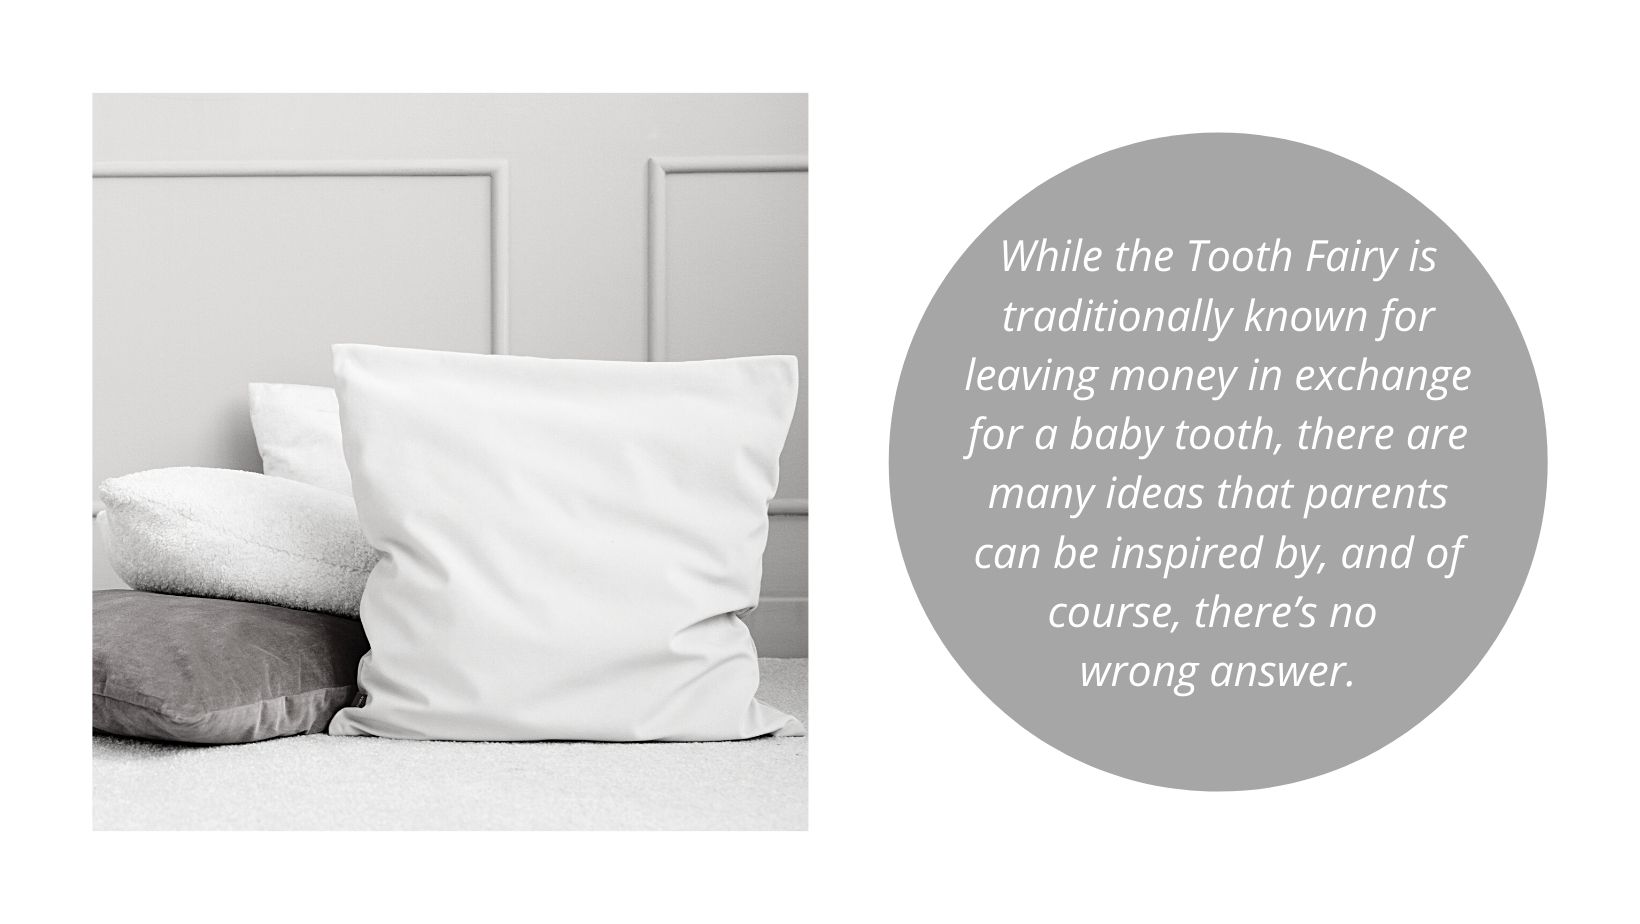 ideas for gifts that the tooth fairy can give